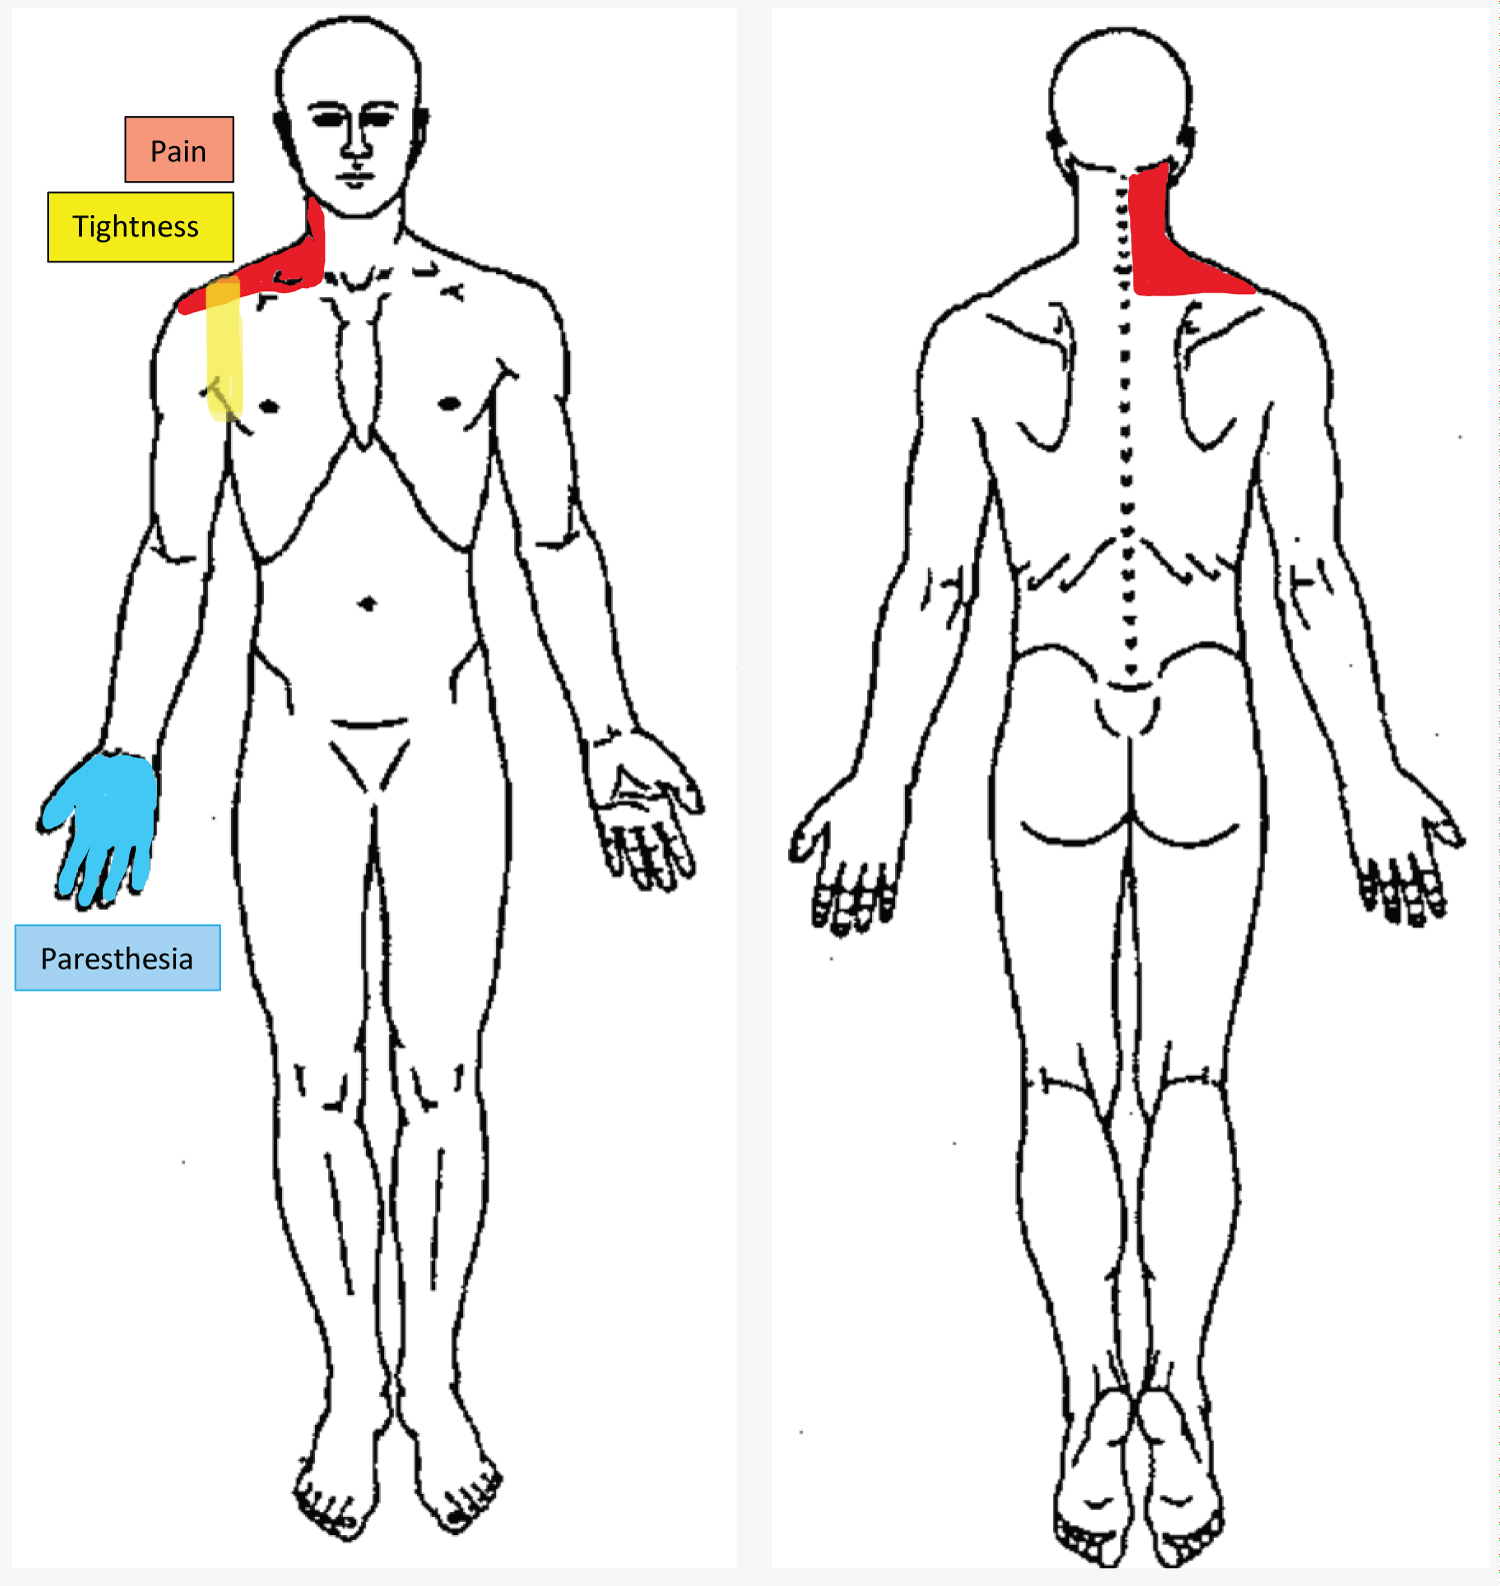 thoracic outlet syndrome pain pattern